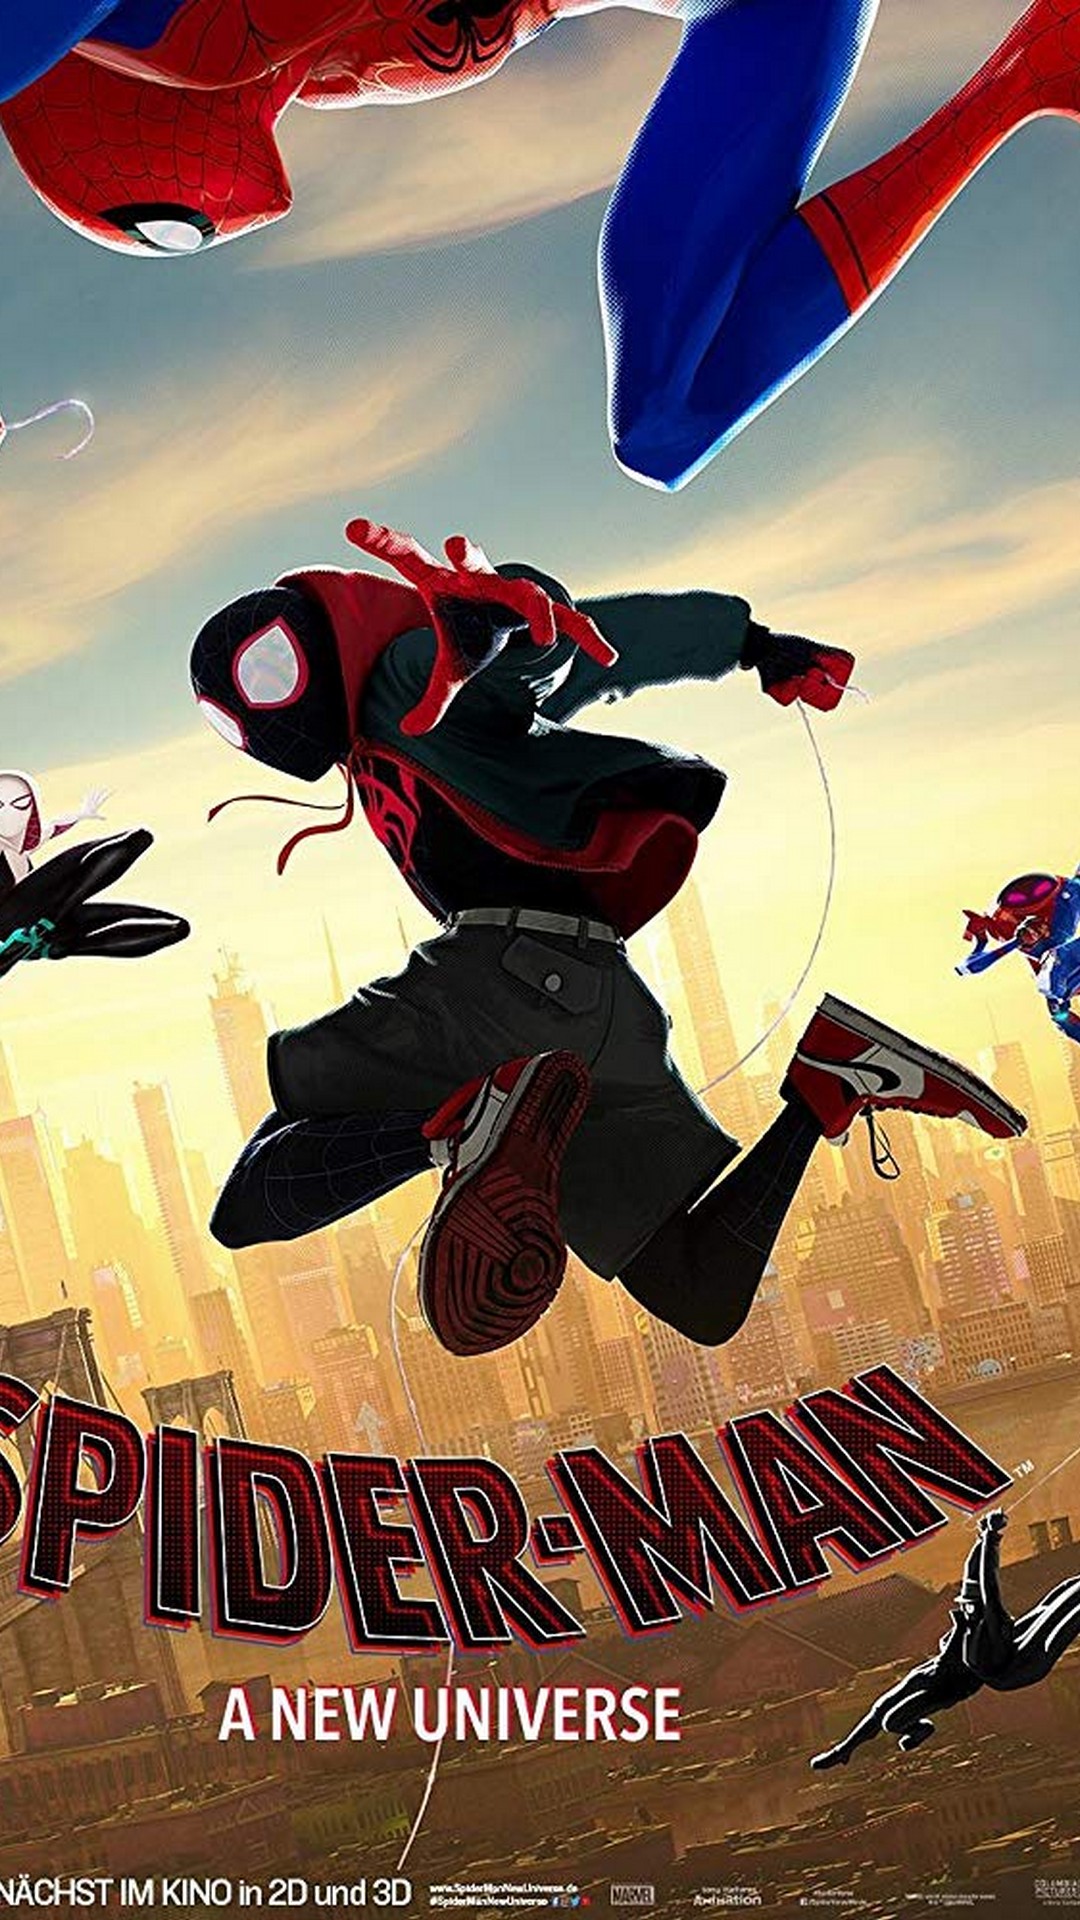 Spider-Man Into the Spider-Verse 2018 Android Wallpaper with resolution 1080X1920 pixel. You can make this wallpaper for your Android backgrounds, Tablet, Smartphones Screensavers and Mobile Phone Lock Screen